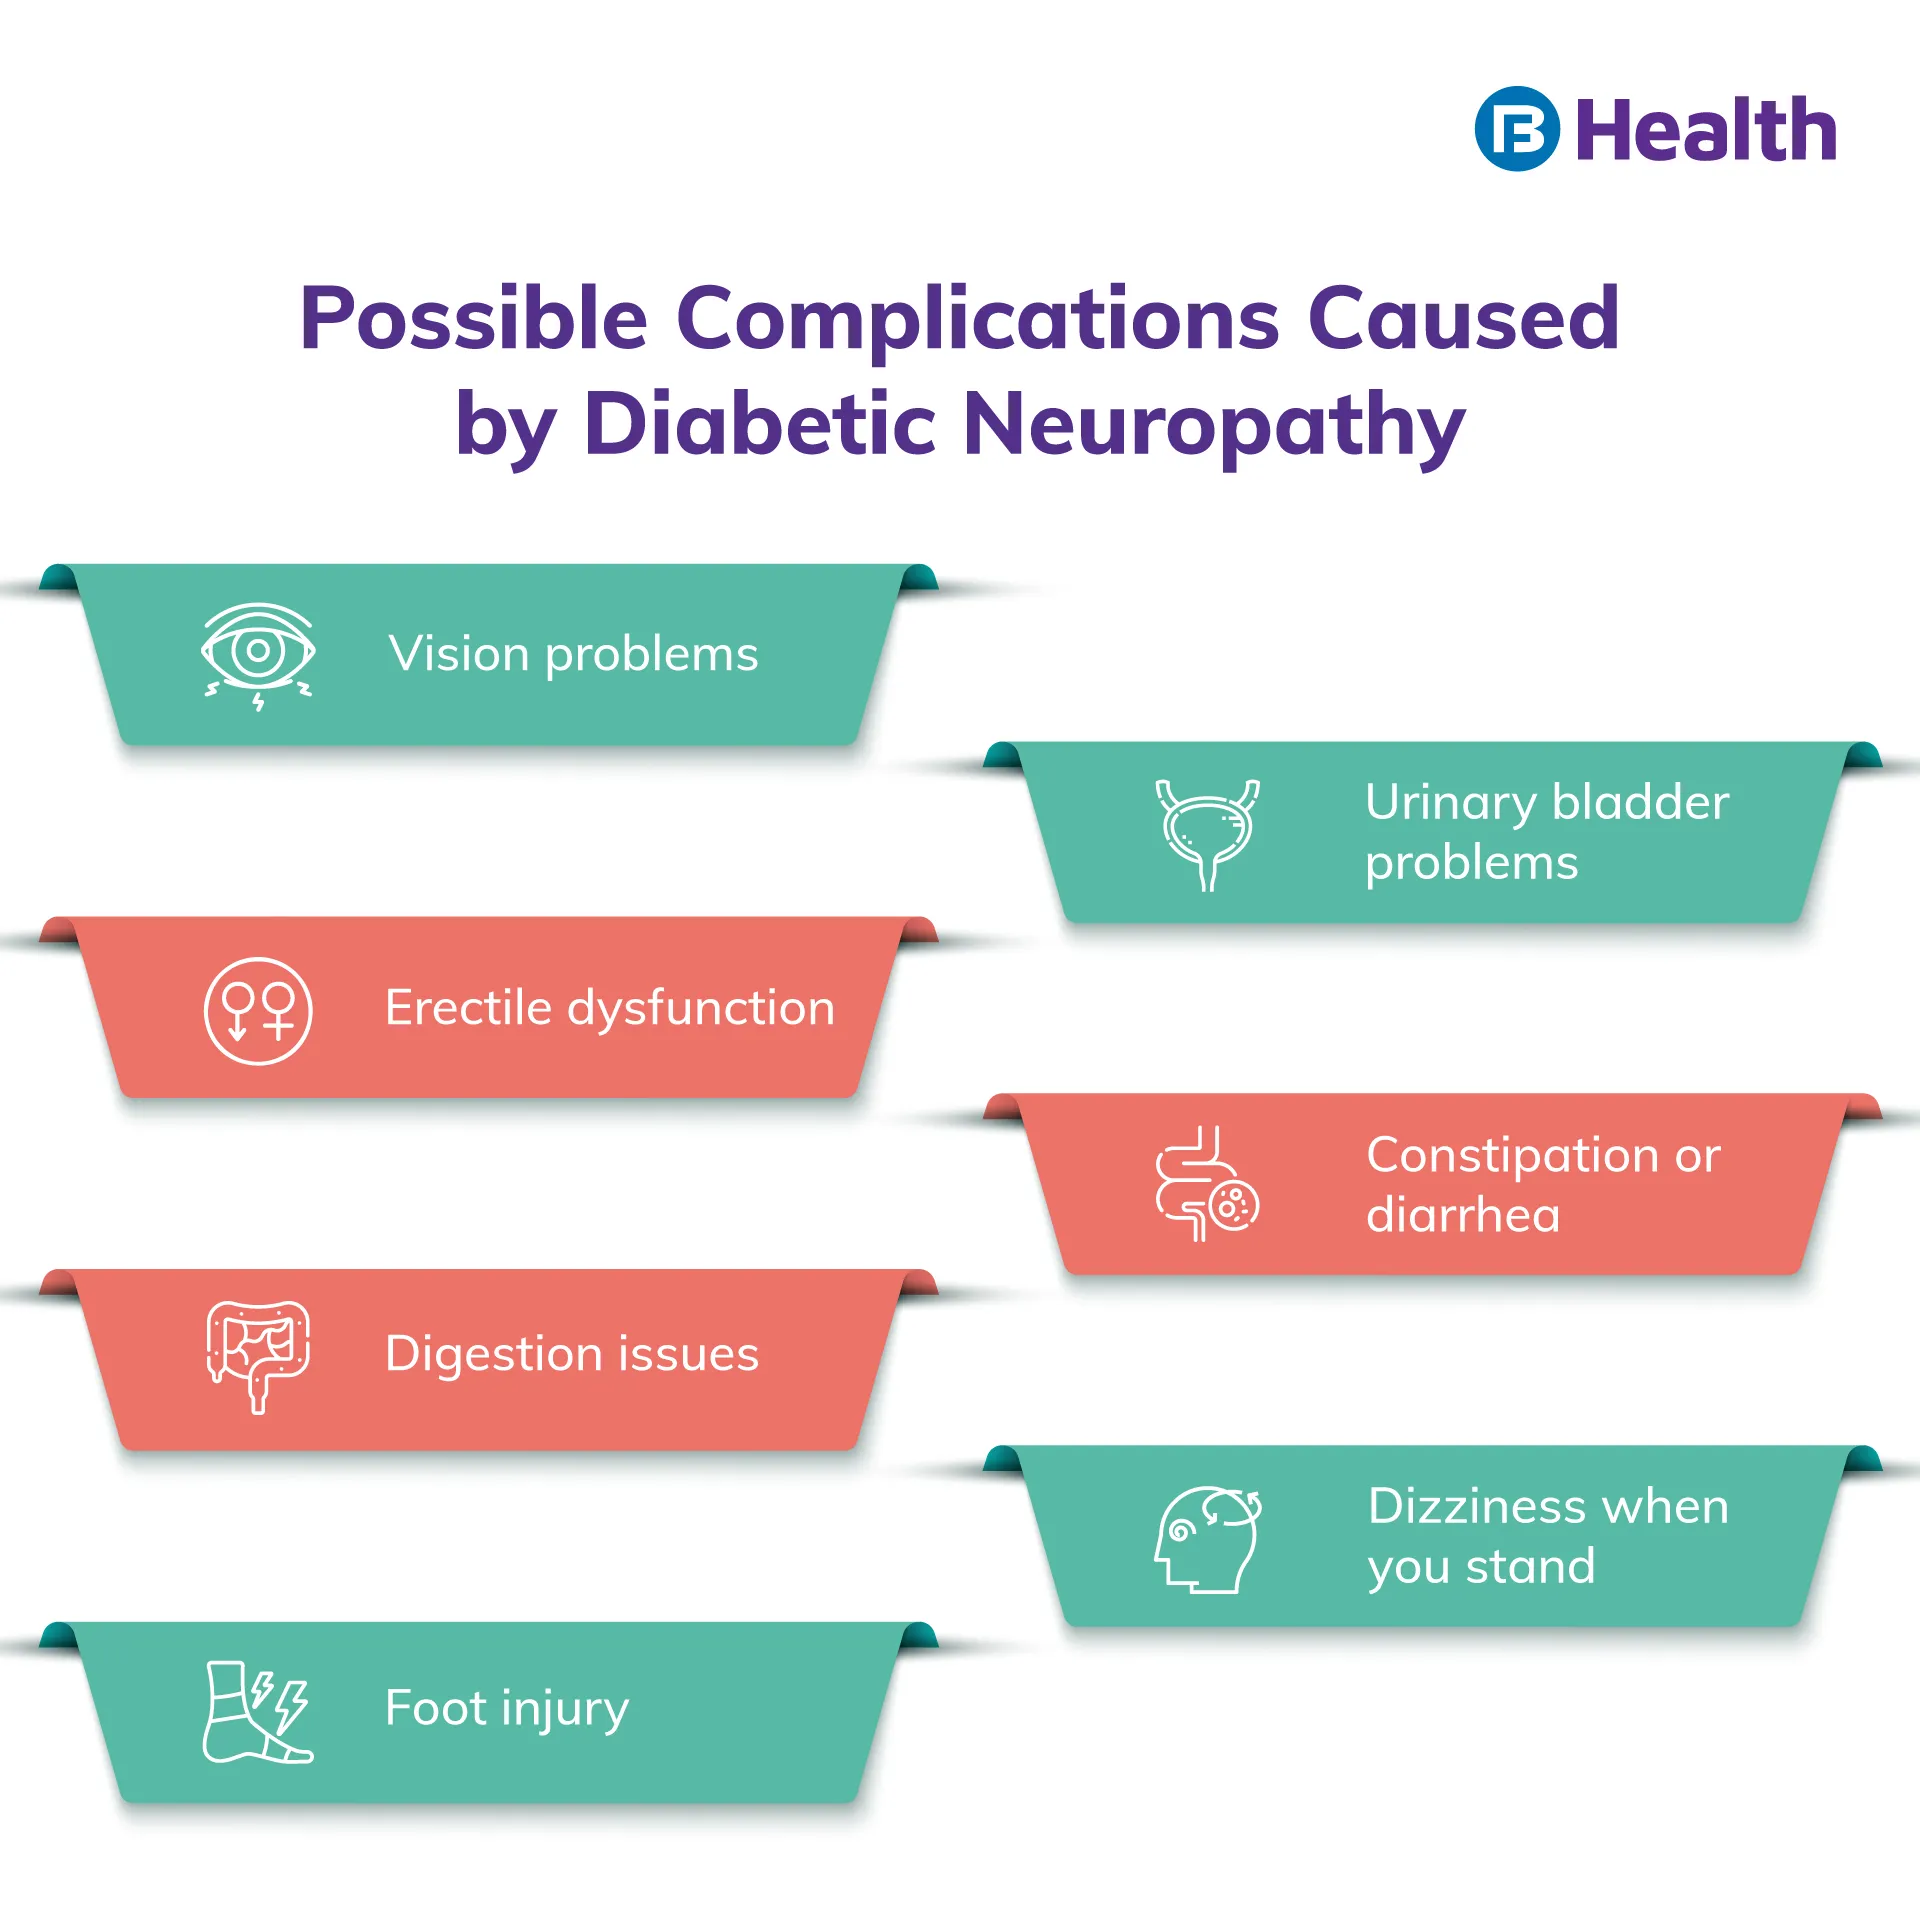 Complications Caused by Diabetic Neuropathy